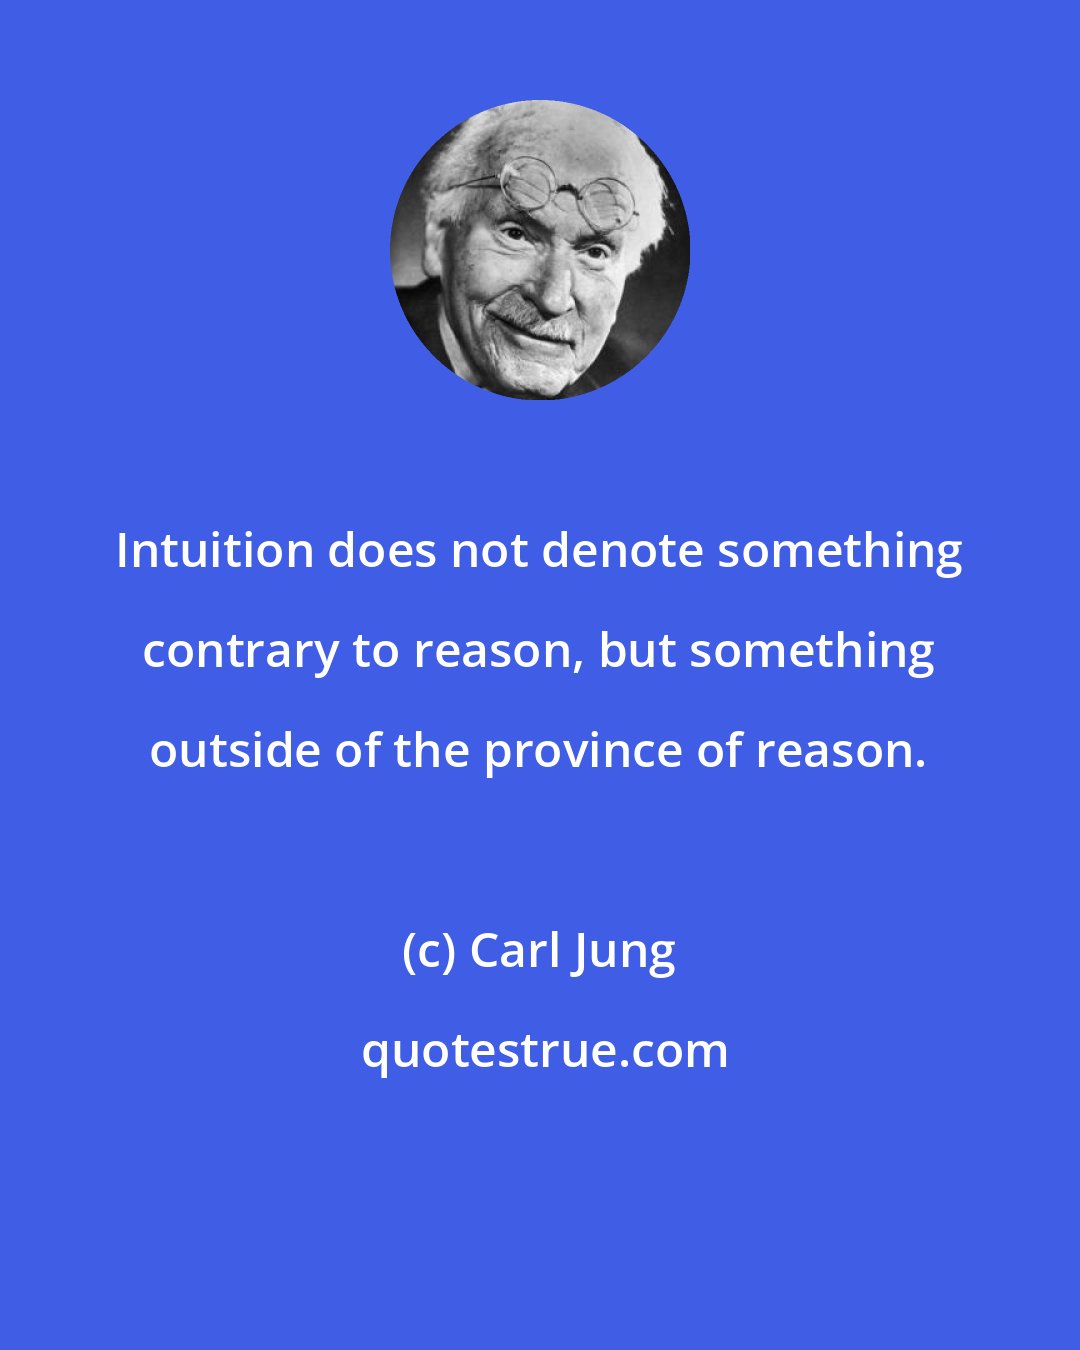 Carl Jung: Intuition does not denote something contrary to reason, but something outside of the province of reason.